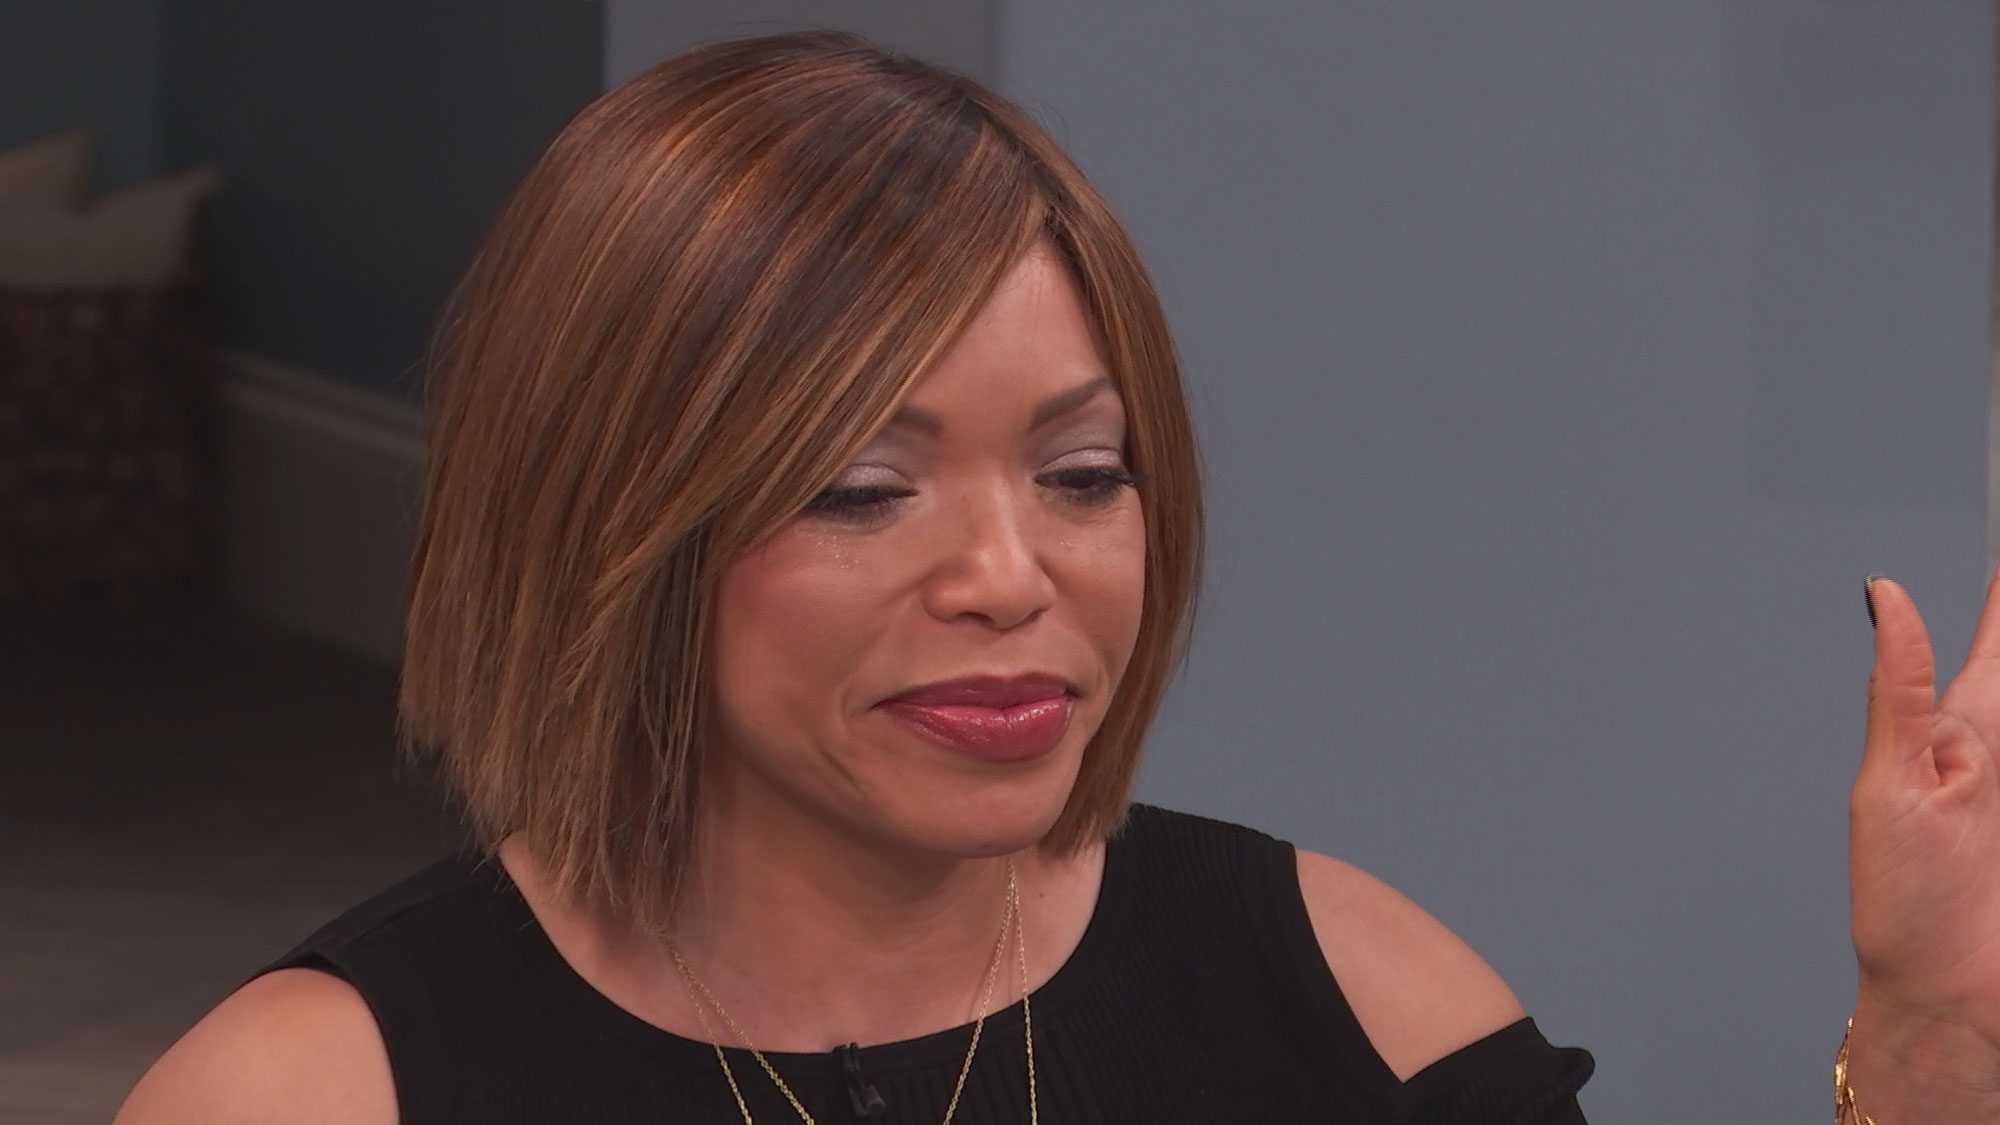 What is Tisha Campbell's net worth? 